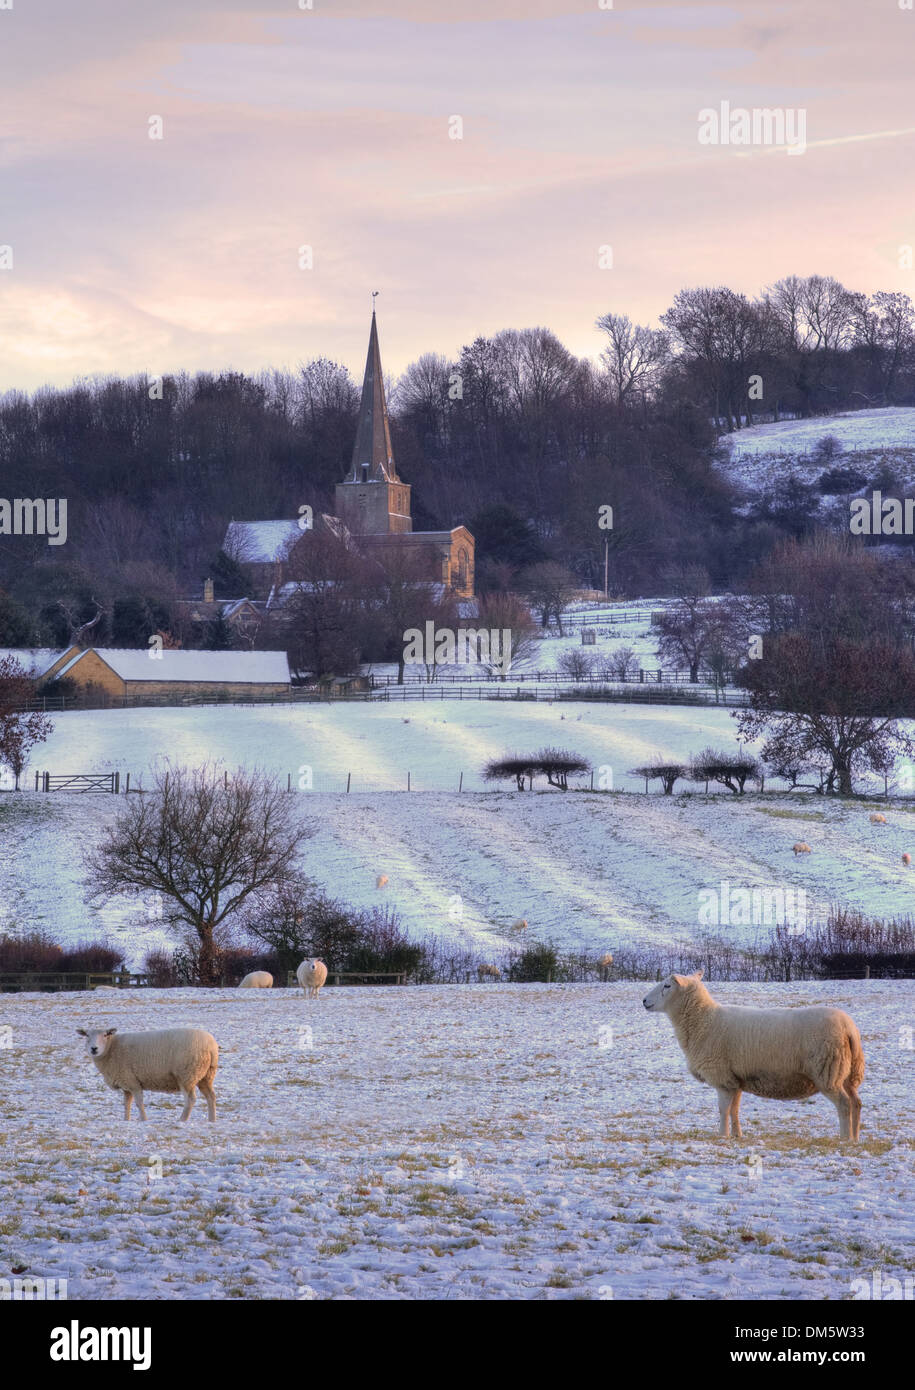 Pretty winters scene at Saintbury with church and sheep, Chipping Campden, Gloucestershire, England. Stock Photo